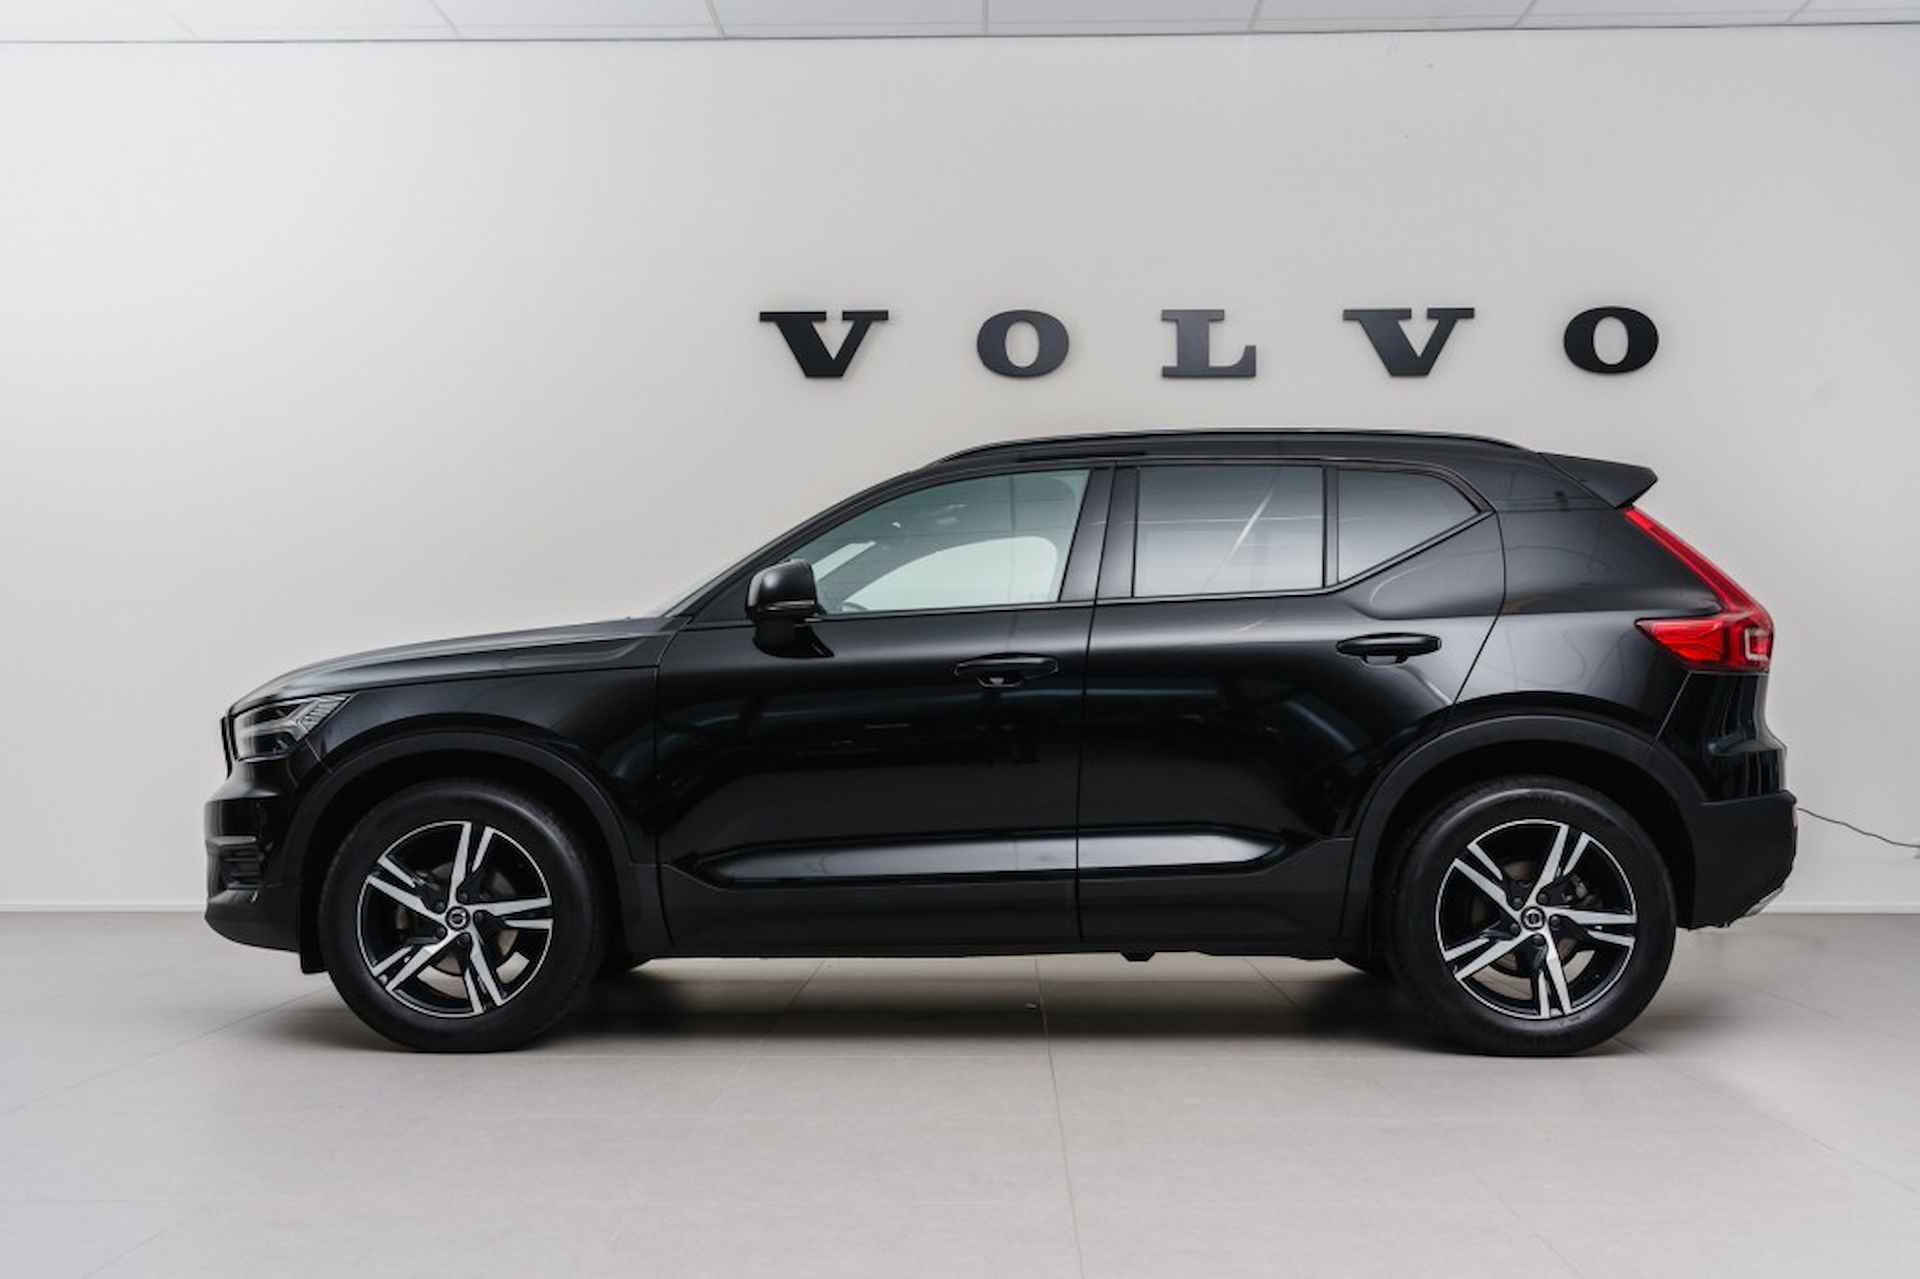 VOLVO Xc40 T3 Geartronic R-Design - 2/23